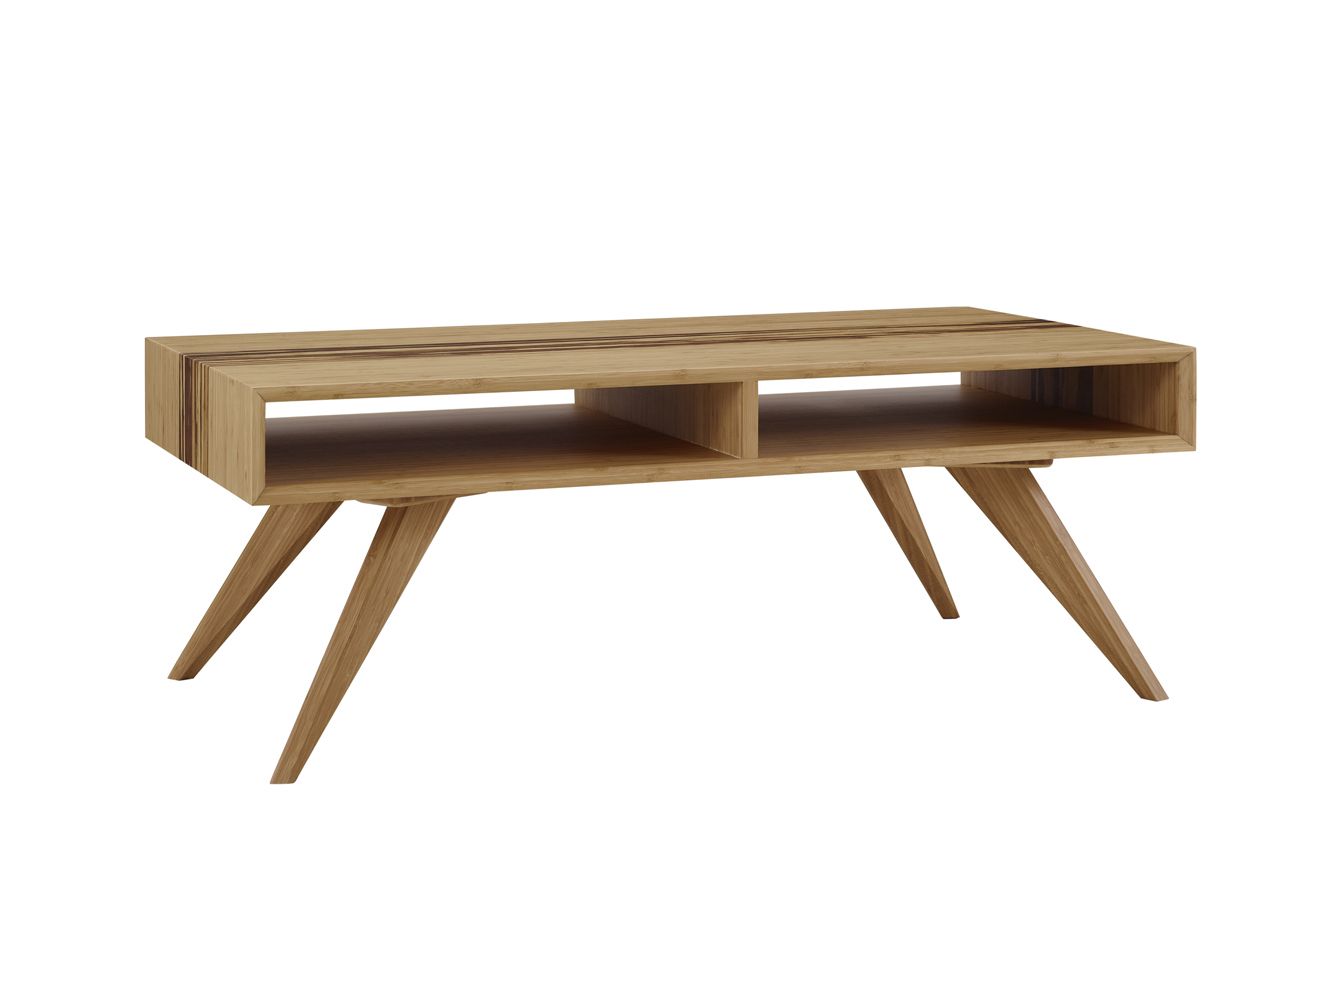 Asana Solid Bamboo Coffee Table In Caramelized Finish – Inspiration  Interiors In Caramalized Coffee Tables (View 4 of 15)